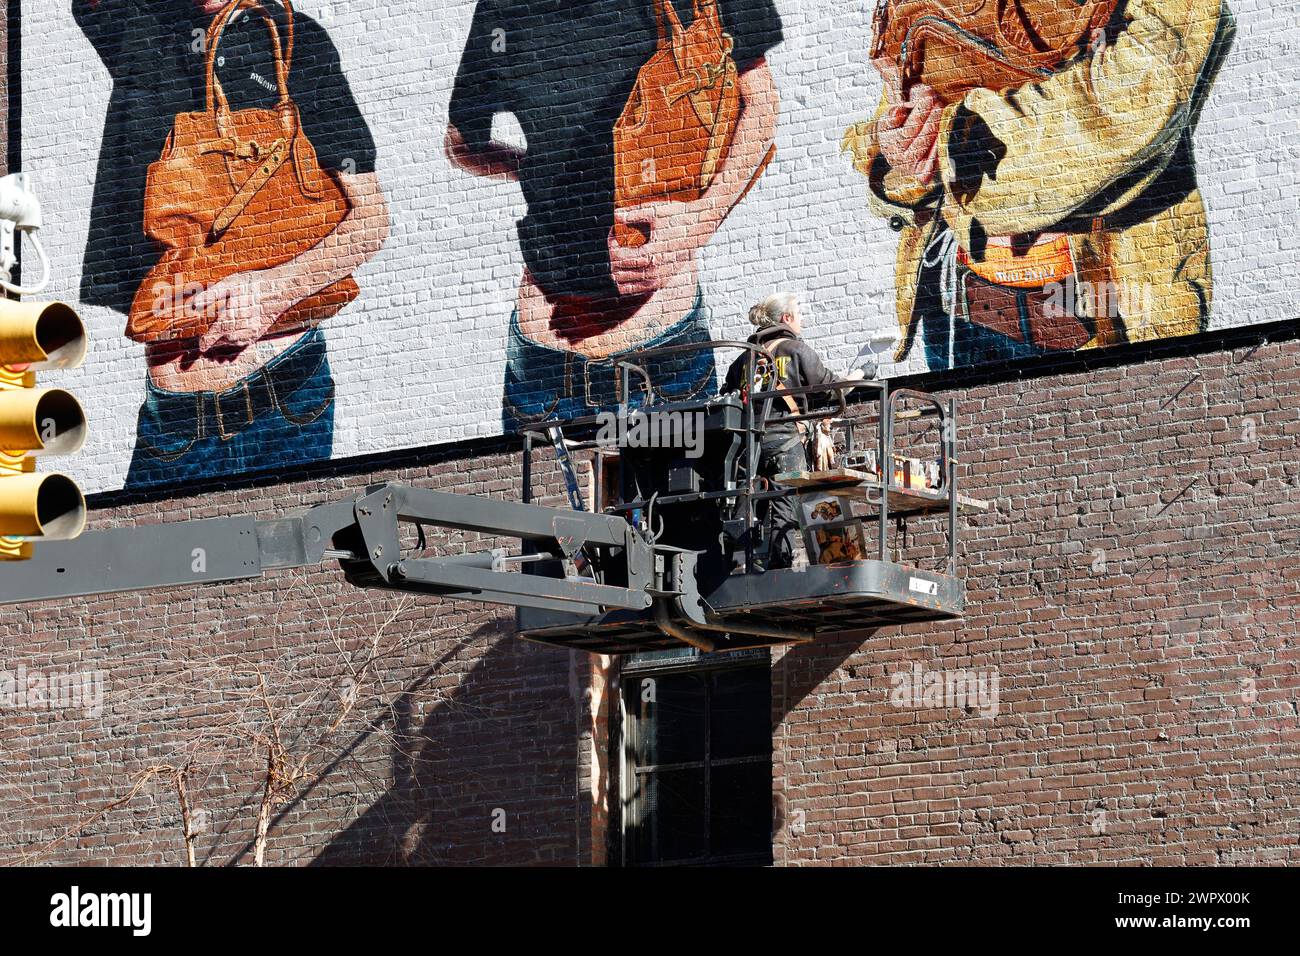 A commercial artist, painters on an articulated boom lift hand painting a billboard advertisement on the side of a building in New York City. Stock Photo